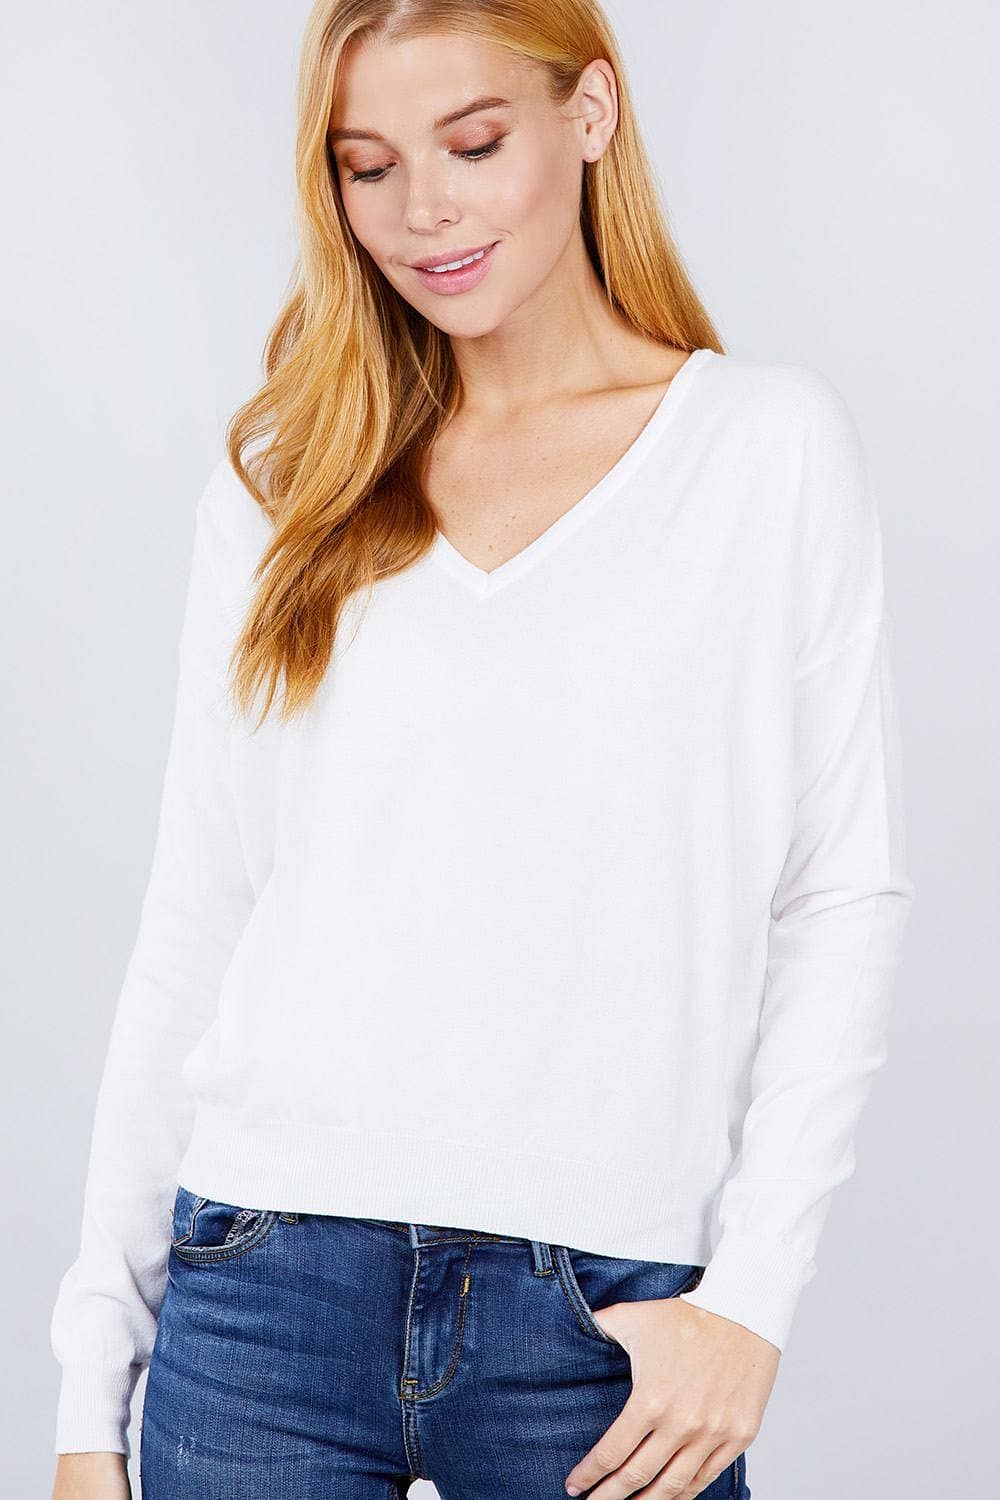 White Long Sleeve V-Neck Pullover Sweater - Shopping Therapy, LLC Sweater